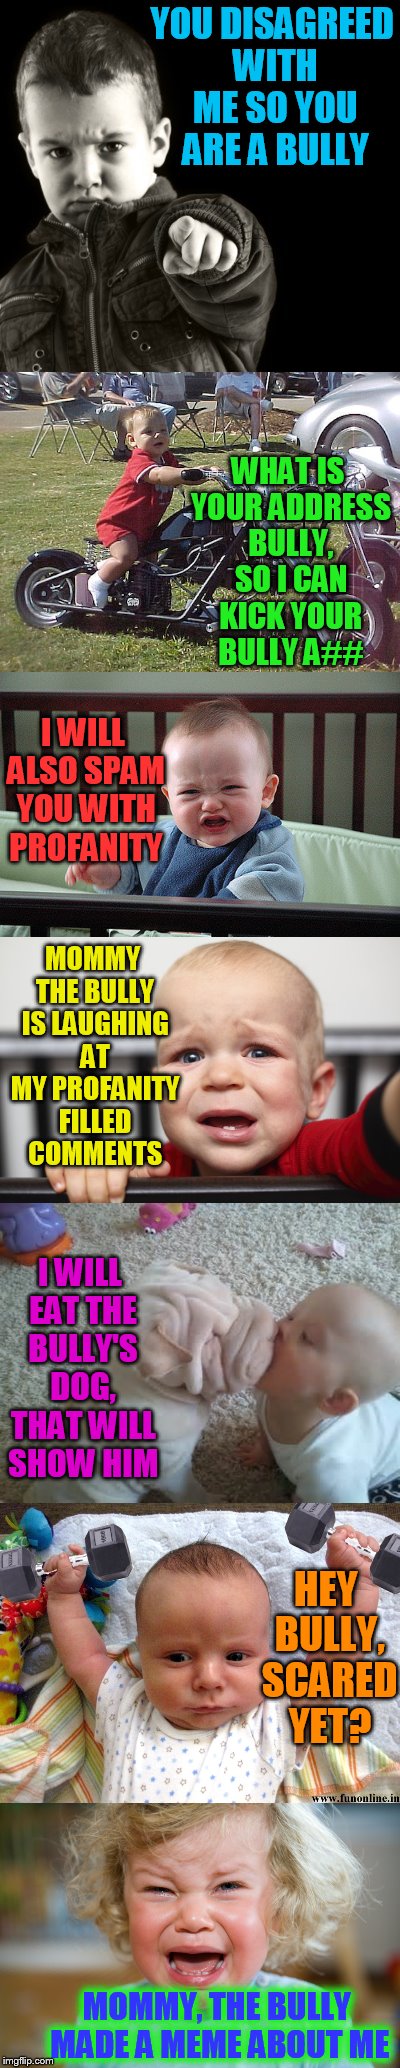 If you like this, just upvote, commenting will probably have him swearing at you for 3 days too. | YOU DISAGREED WITH ME SO YOU ARE A BULLY; WHAT IS YOUR ADDRESS BULLY, SO I CAN KICK YOUR BULLY A##; I WILL ALSO SPAM YOU WITH PROFANITY; MOMMY THE BULLY IS LAUGHING AT MY PROFANITY FILLED COMMENTS; I WILL EAT THE BULLY'S DOG, THAT WILL SHOW HIM; HEY BULLY, SCARED YET? MOMMY, THE BULLY MADE A MEME ABOUT ME | image tagged in meme,memebully | made w/ Imgflip meme maker